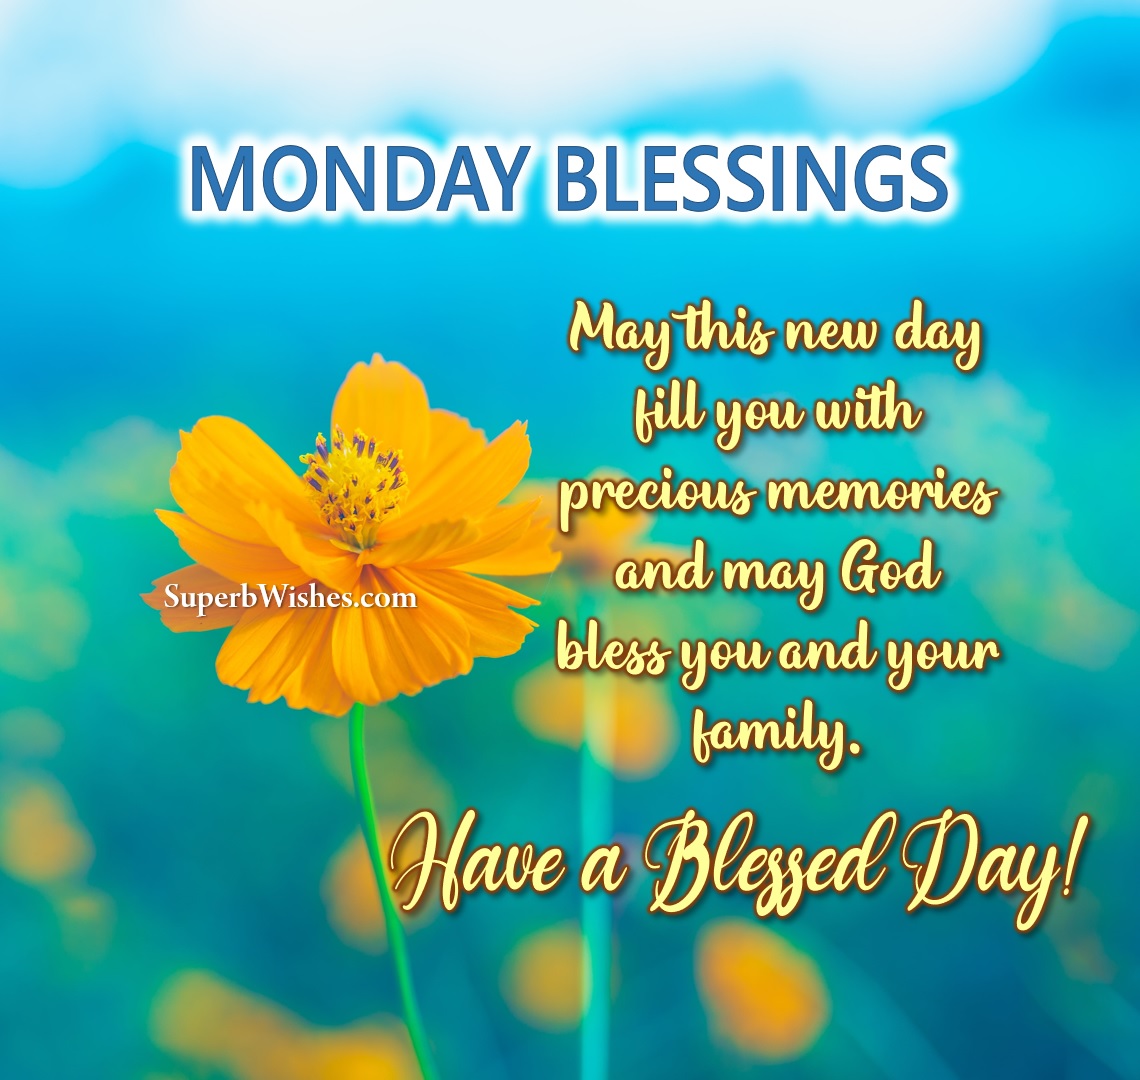 Monday Blessings 2023 Images - Smile On Your Face | SuperbWishes